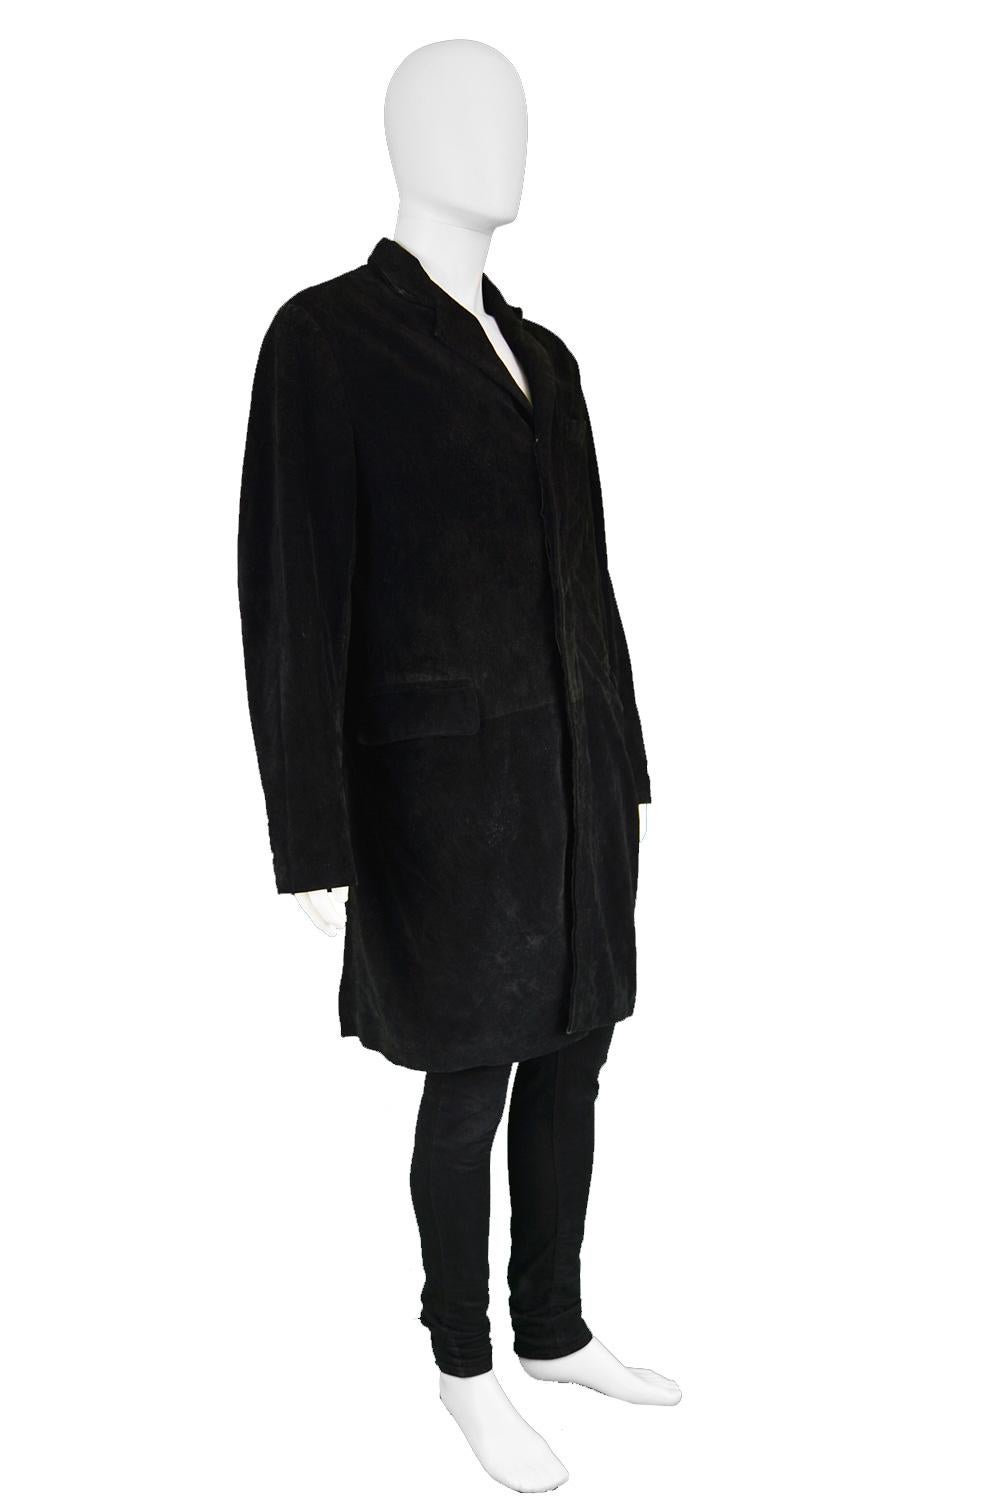 Joseph Homme Black Suede Mens Vintage Coat, 1990s In Good Condition For Sale In Doncaster, South Yorkshire